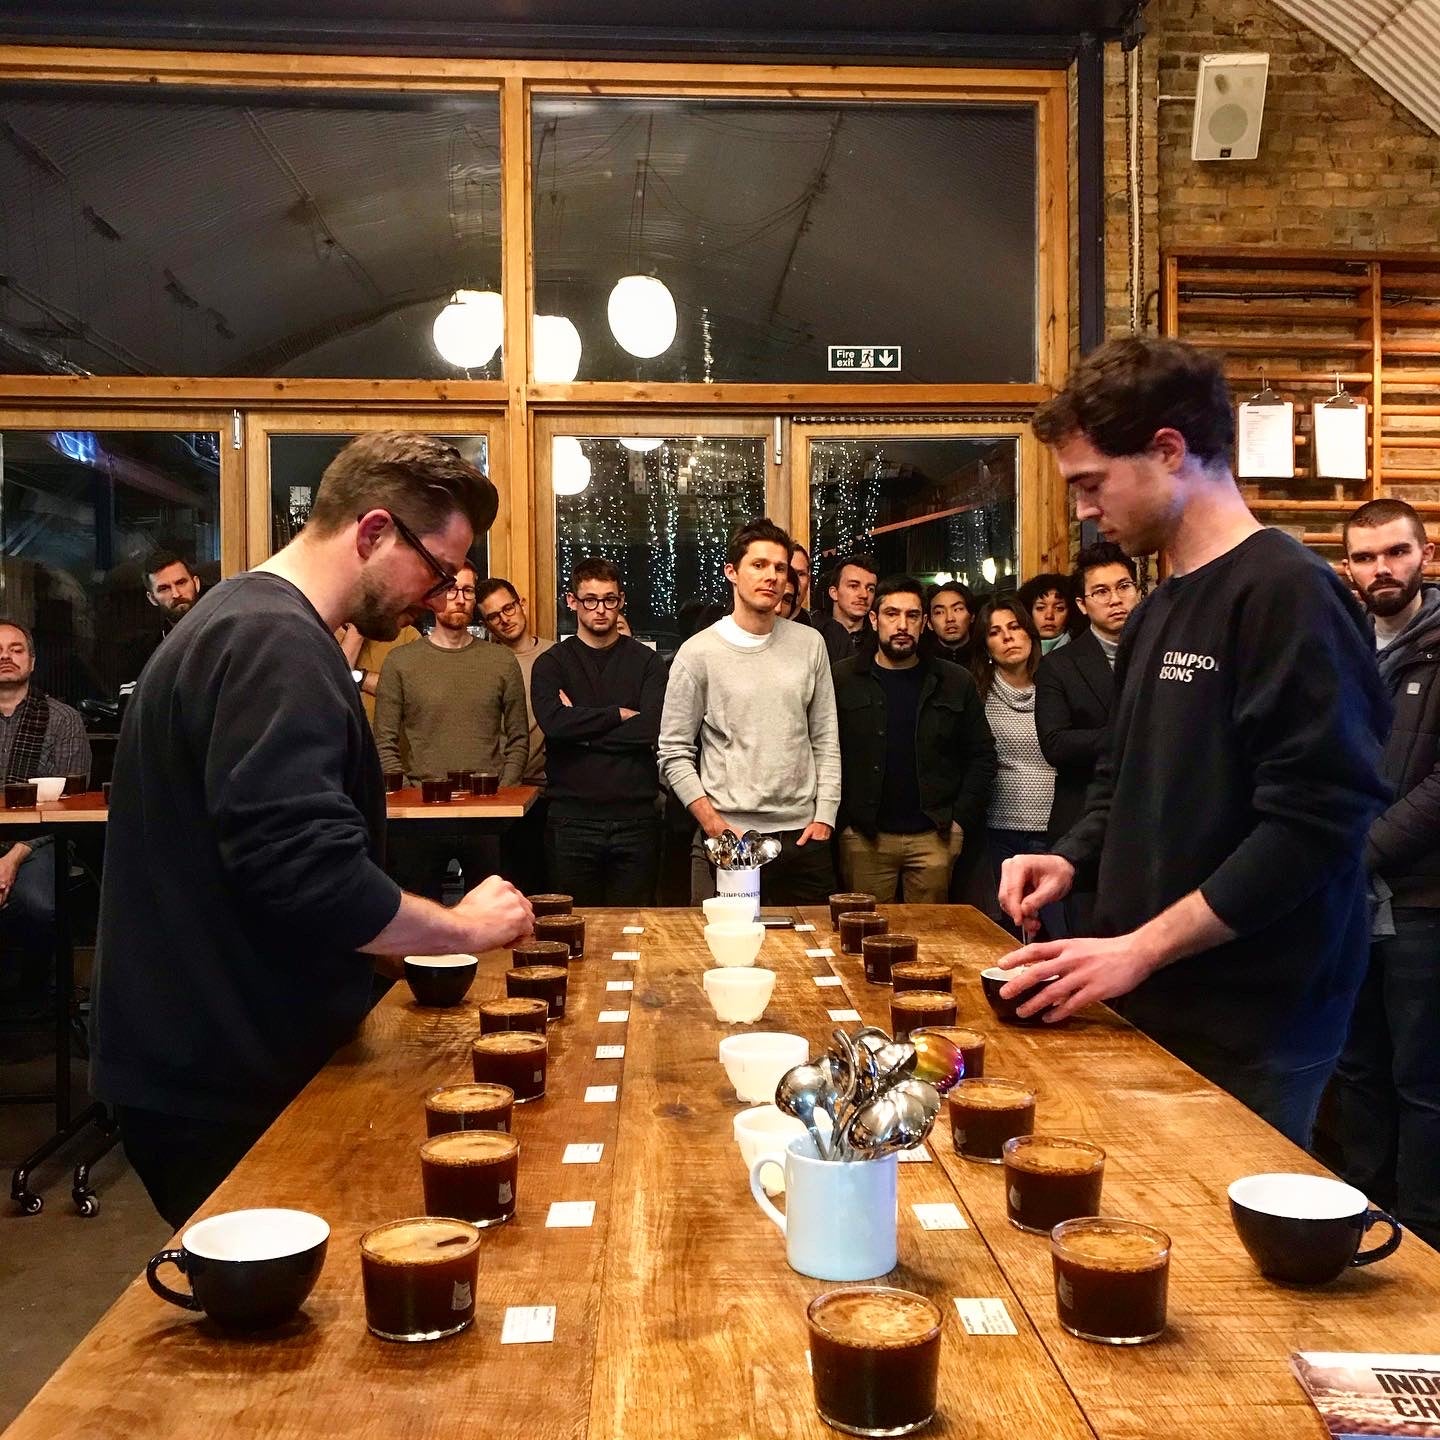 Cupping Club: Importance of training & development in coffee.